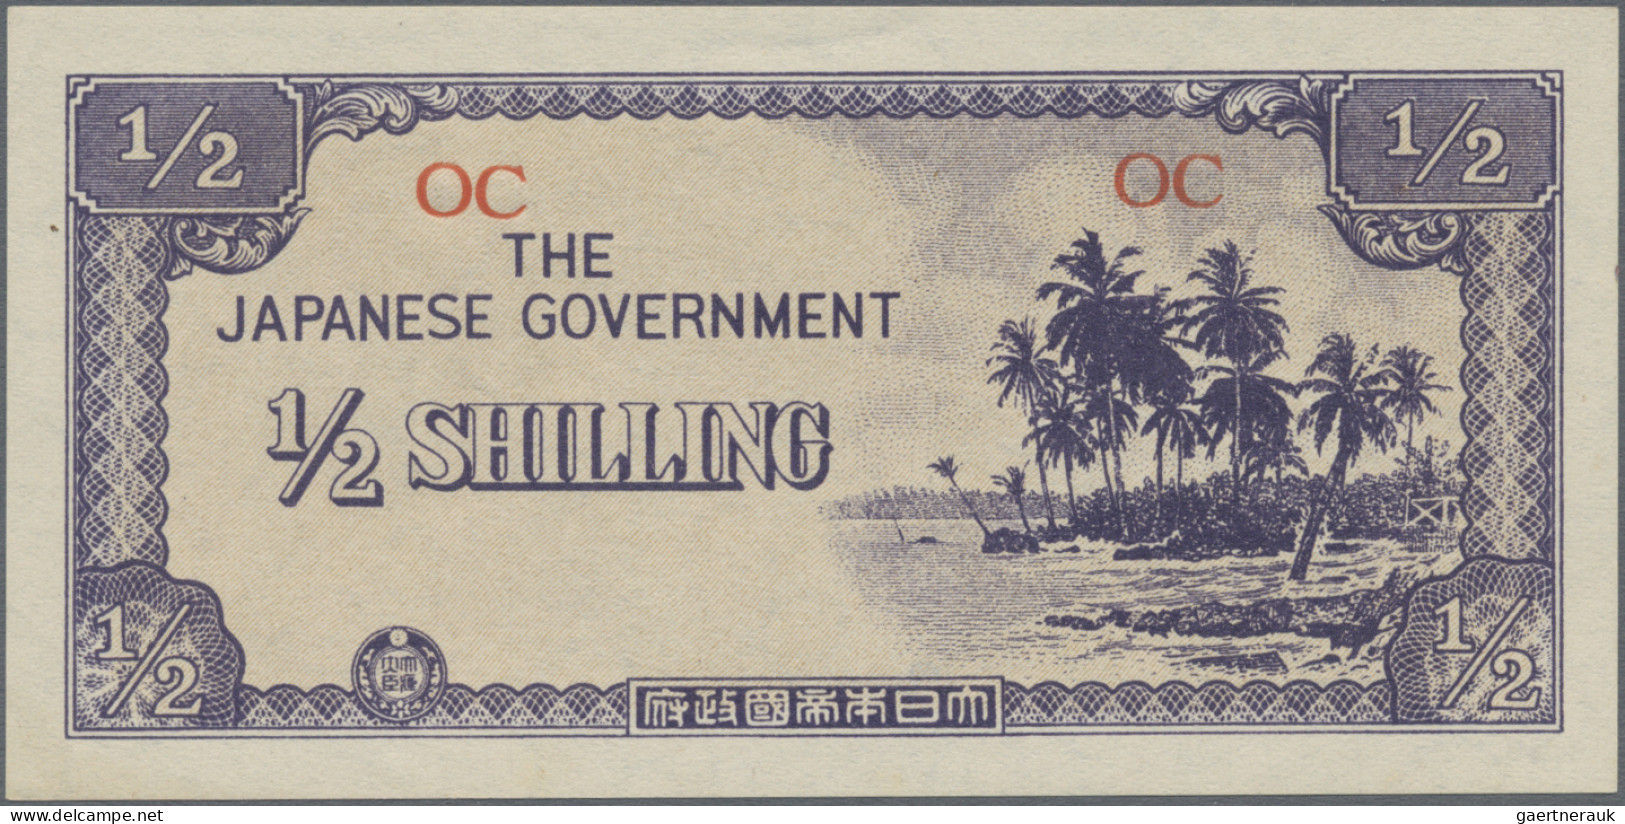 Oceania: The Japanese Government – OCEANIA, set with ½, 1, 10 Shillings and 1 Po